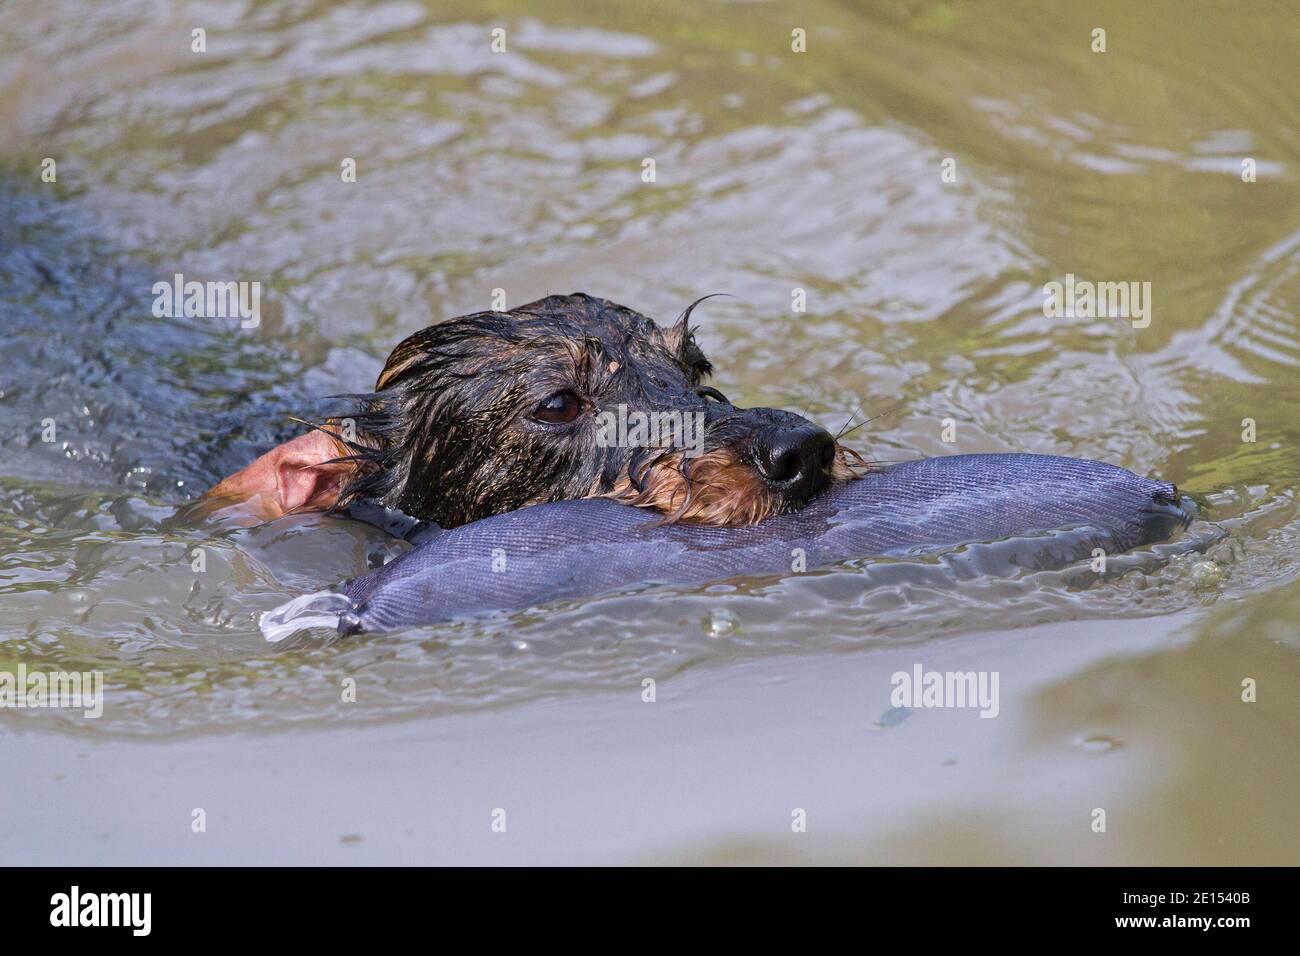 Enthusiastic Dachshund In The Water Work With Dummy Stock Photo